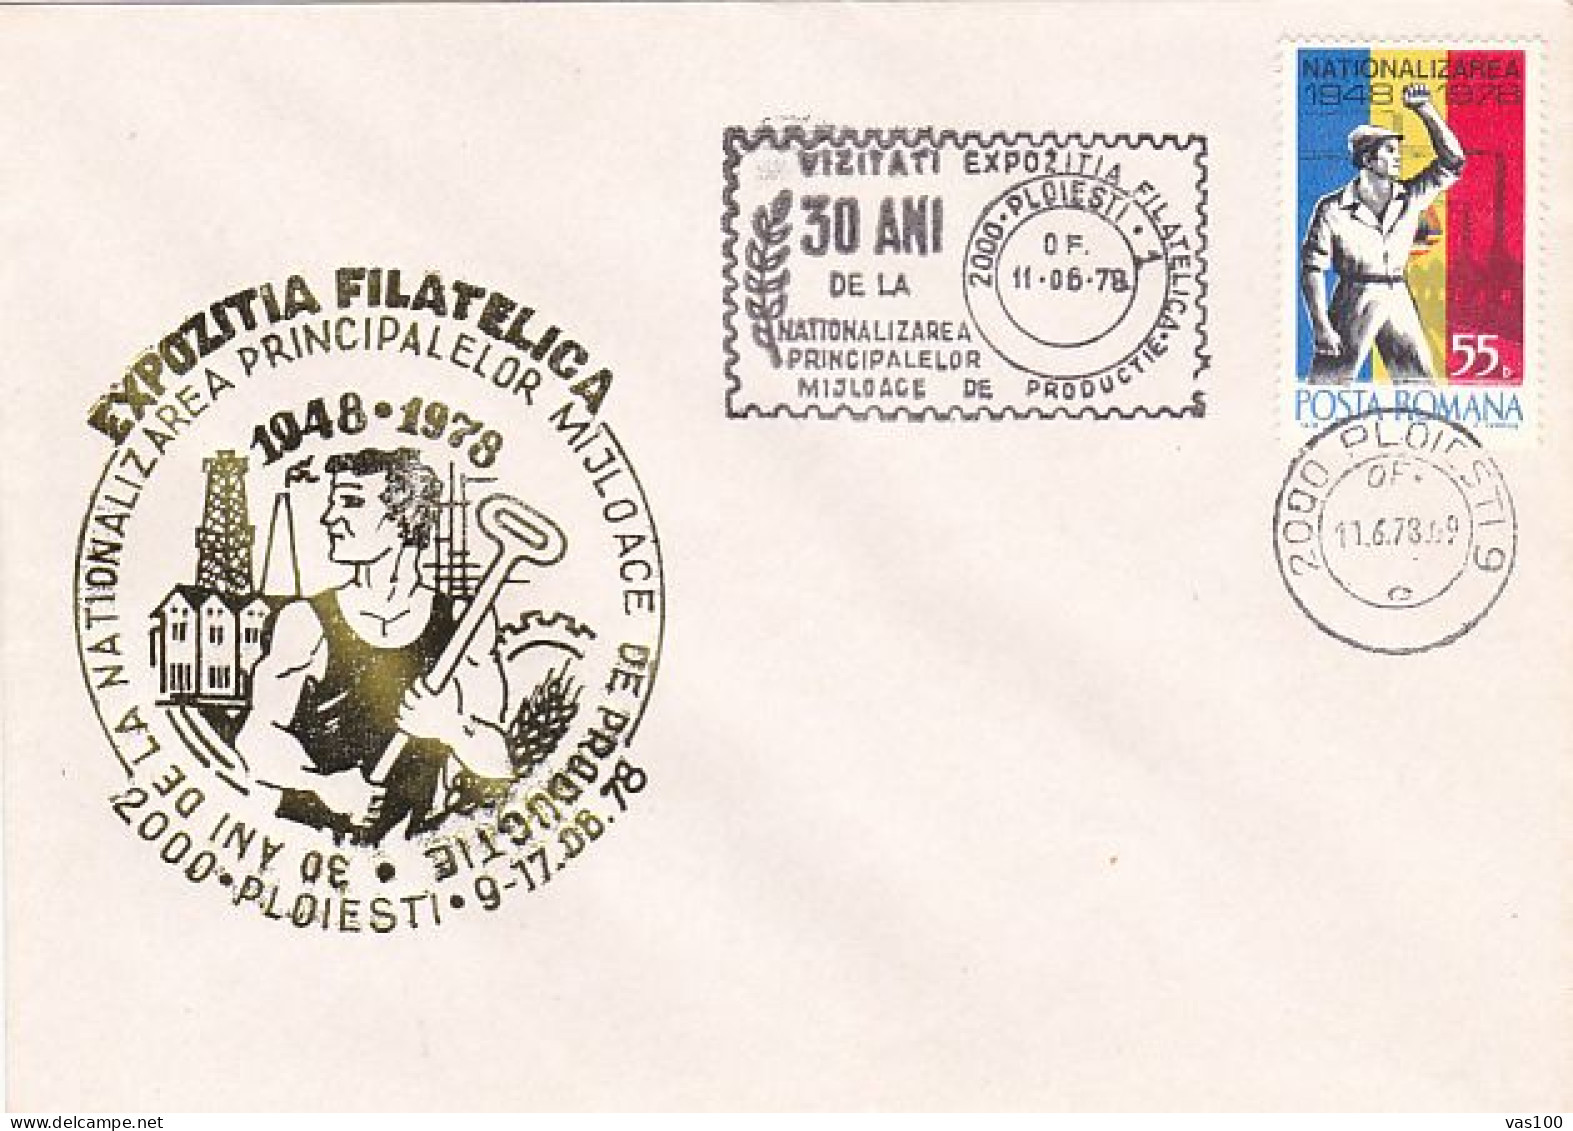 MAIN PRODUCTION MEANS NATIONALIZATION, WELDER, SPECIAL COVER, 1978, ROMANIA - Covers & Documents